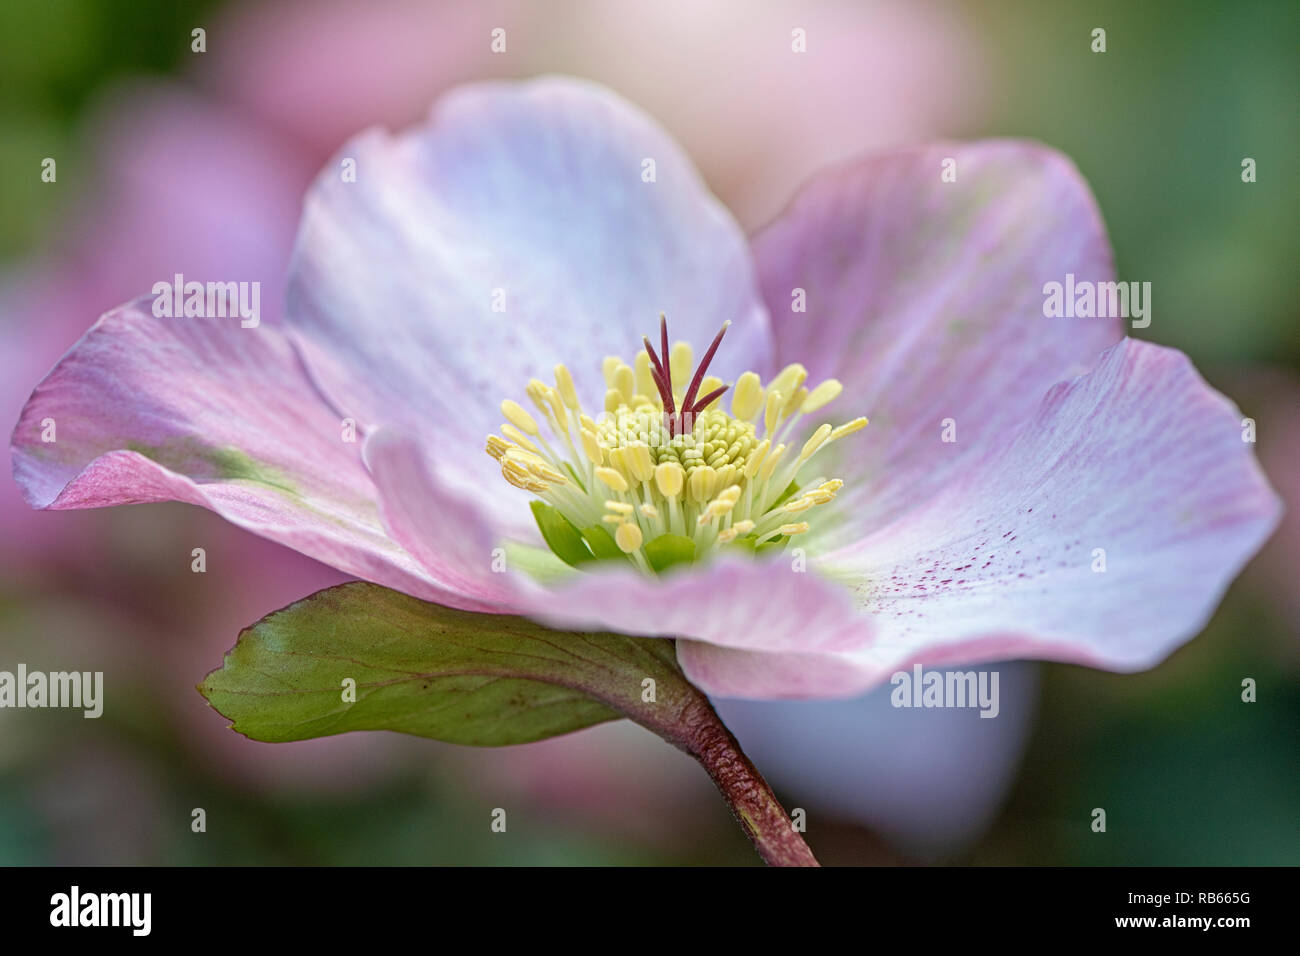 Close-up image of the beautiful spring flowering Hellebore also known as the Lenten Rose or Christmas Rose Stock Photo